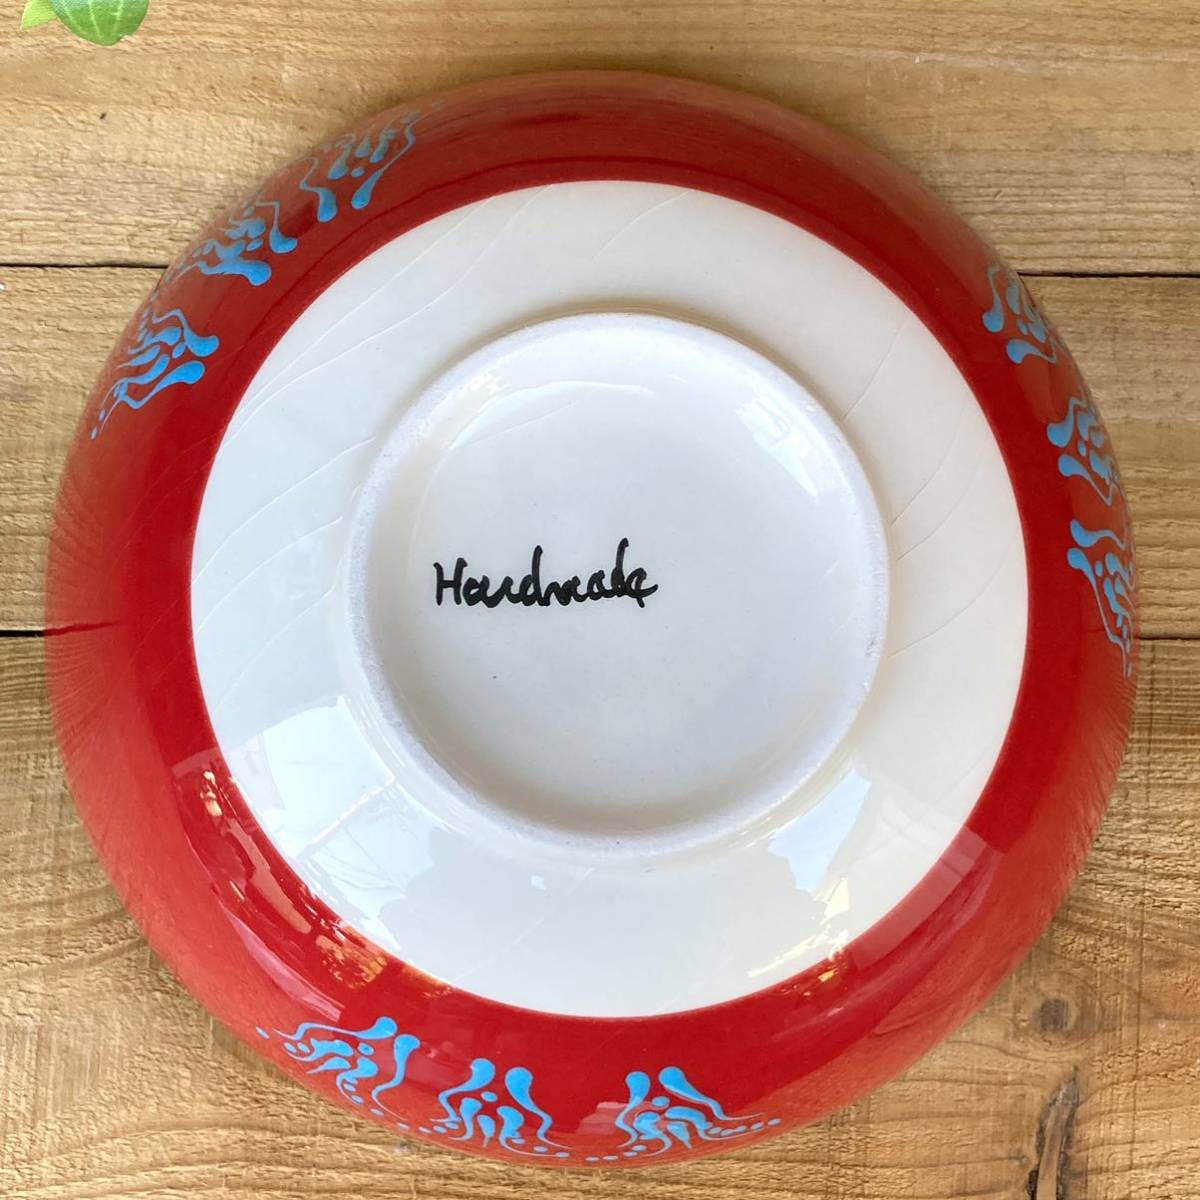 22cm* new goods * Turkey ceramics bowl plate * red red * hand made kyu tough ya ceramics [ conditions attaching free shipping ]205